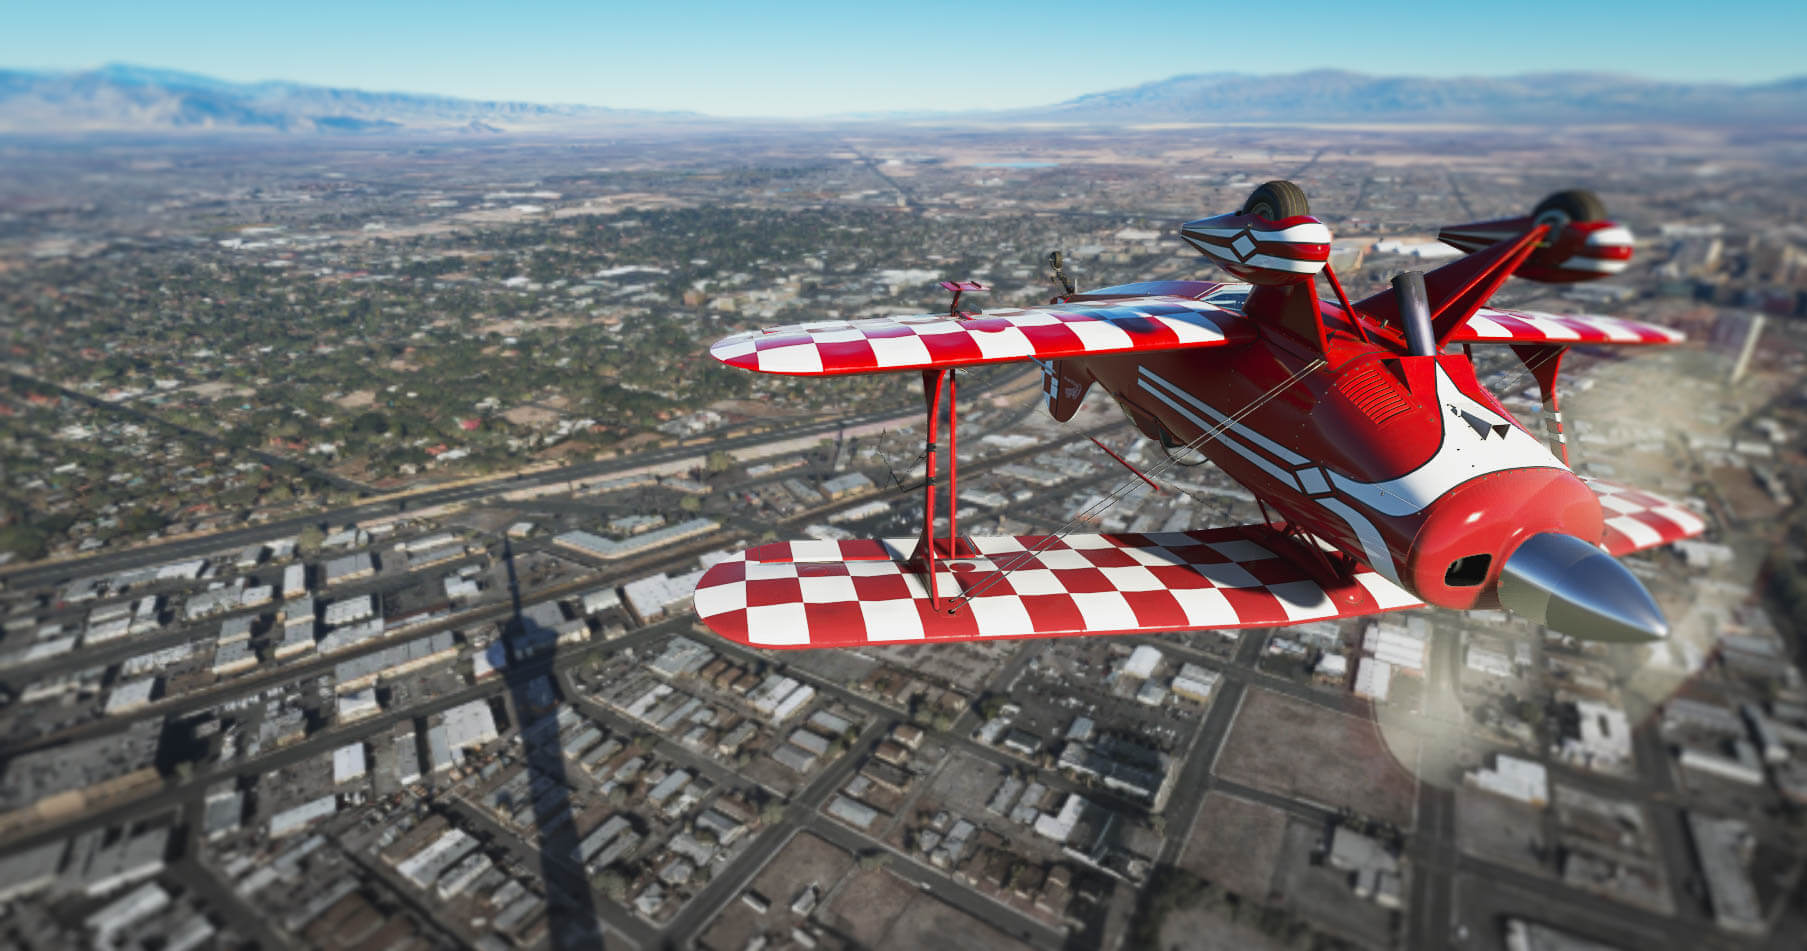 A red bi-plane aircraft passe over a city at low altitude inverted.